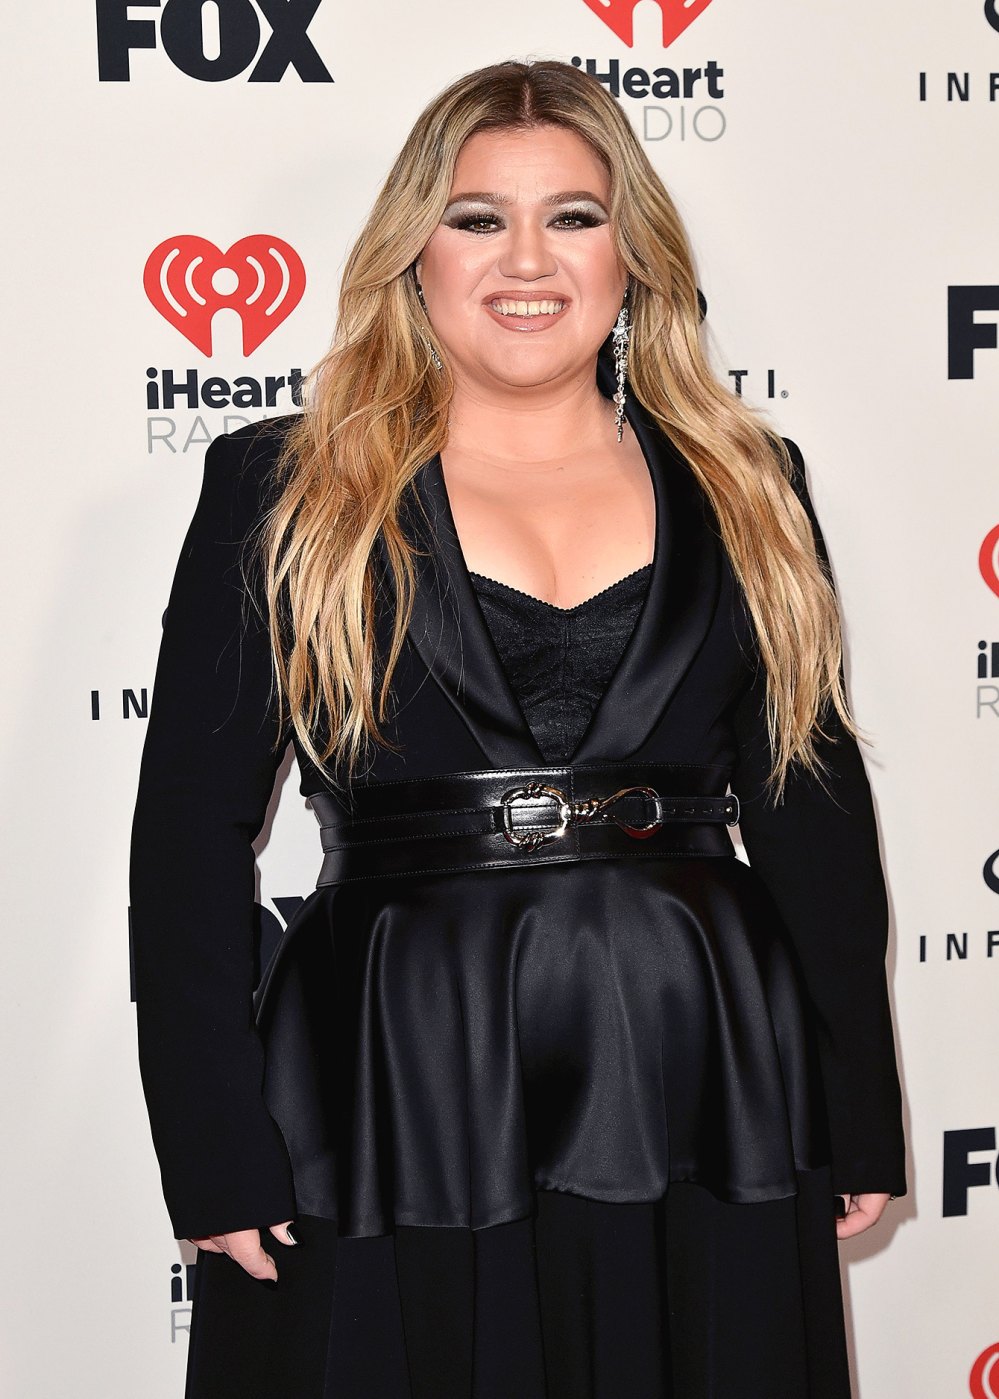 Kelly Clarkson Takes Dig at Ex-Husband Brandon Blackstock With New Song ‘Mine’ - 743